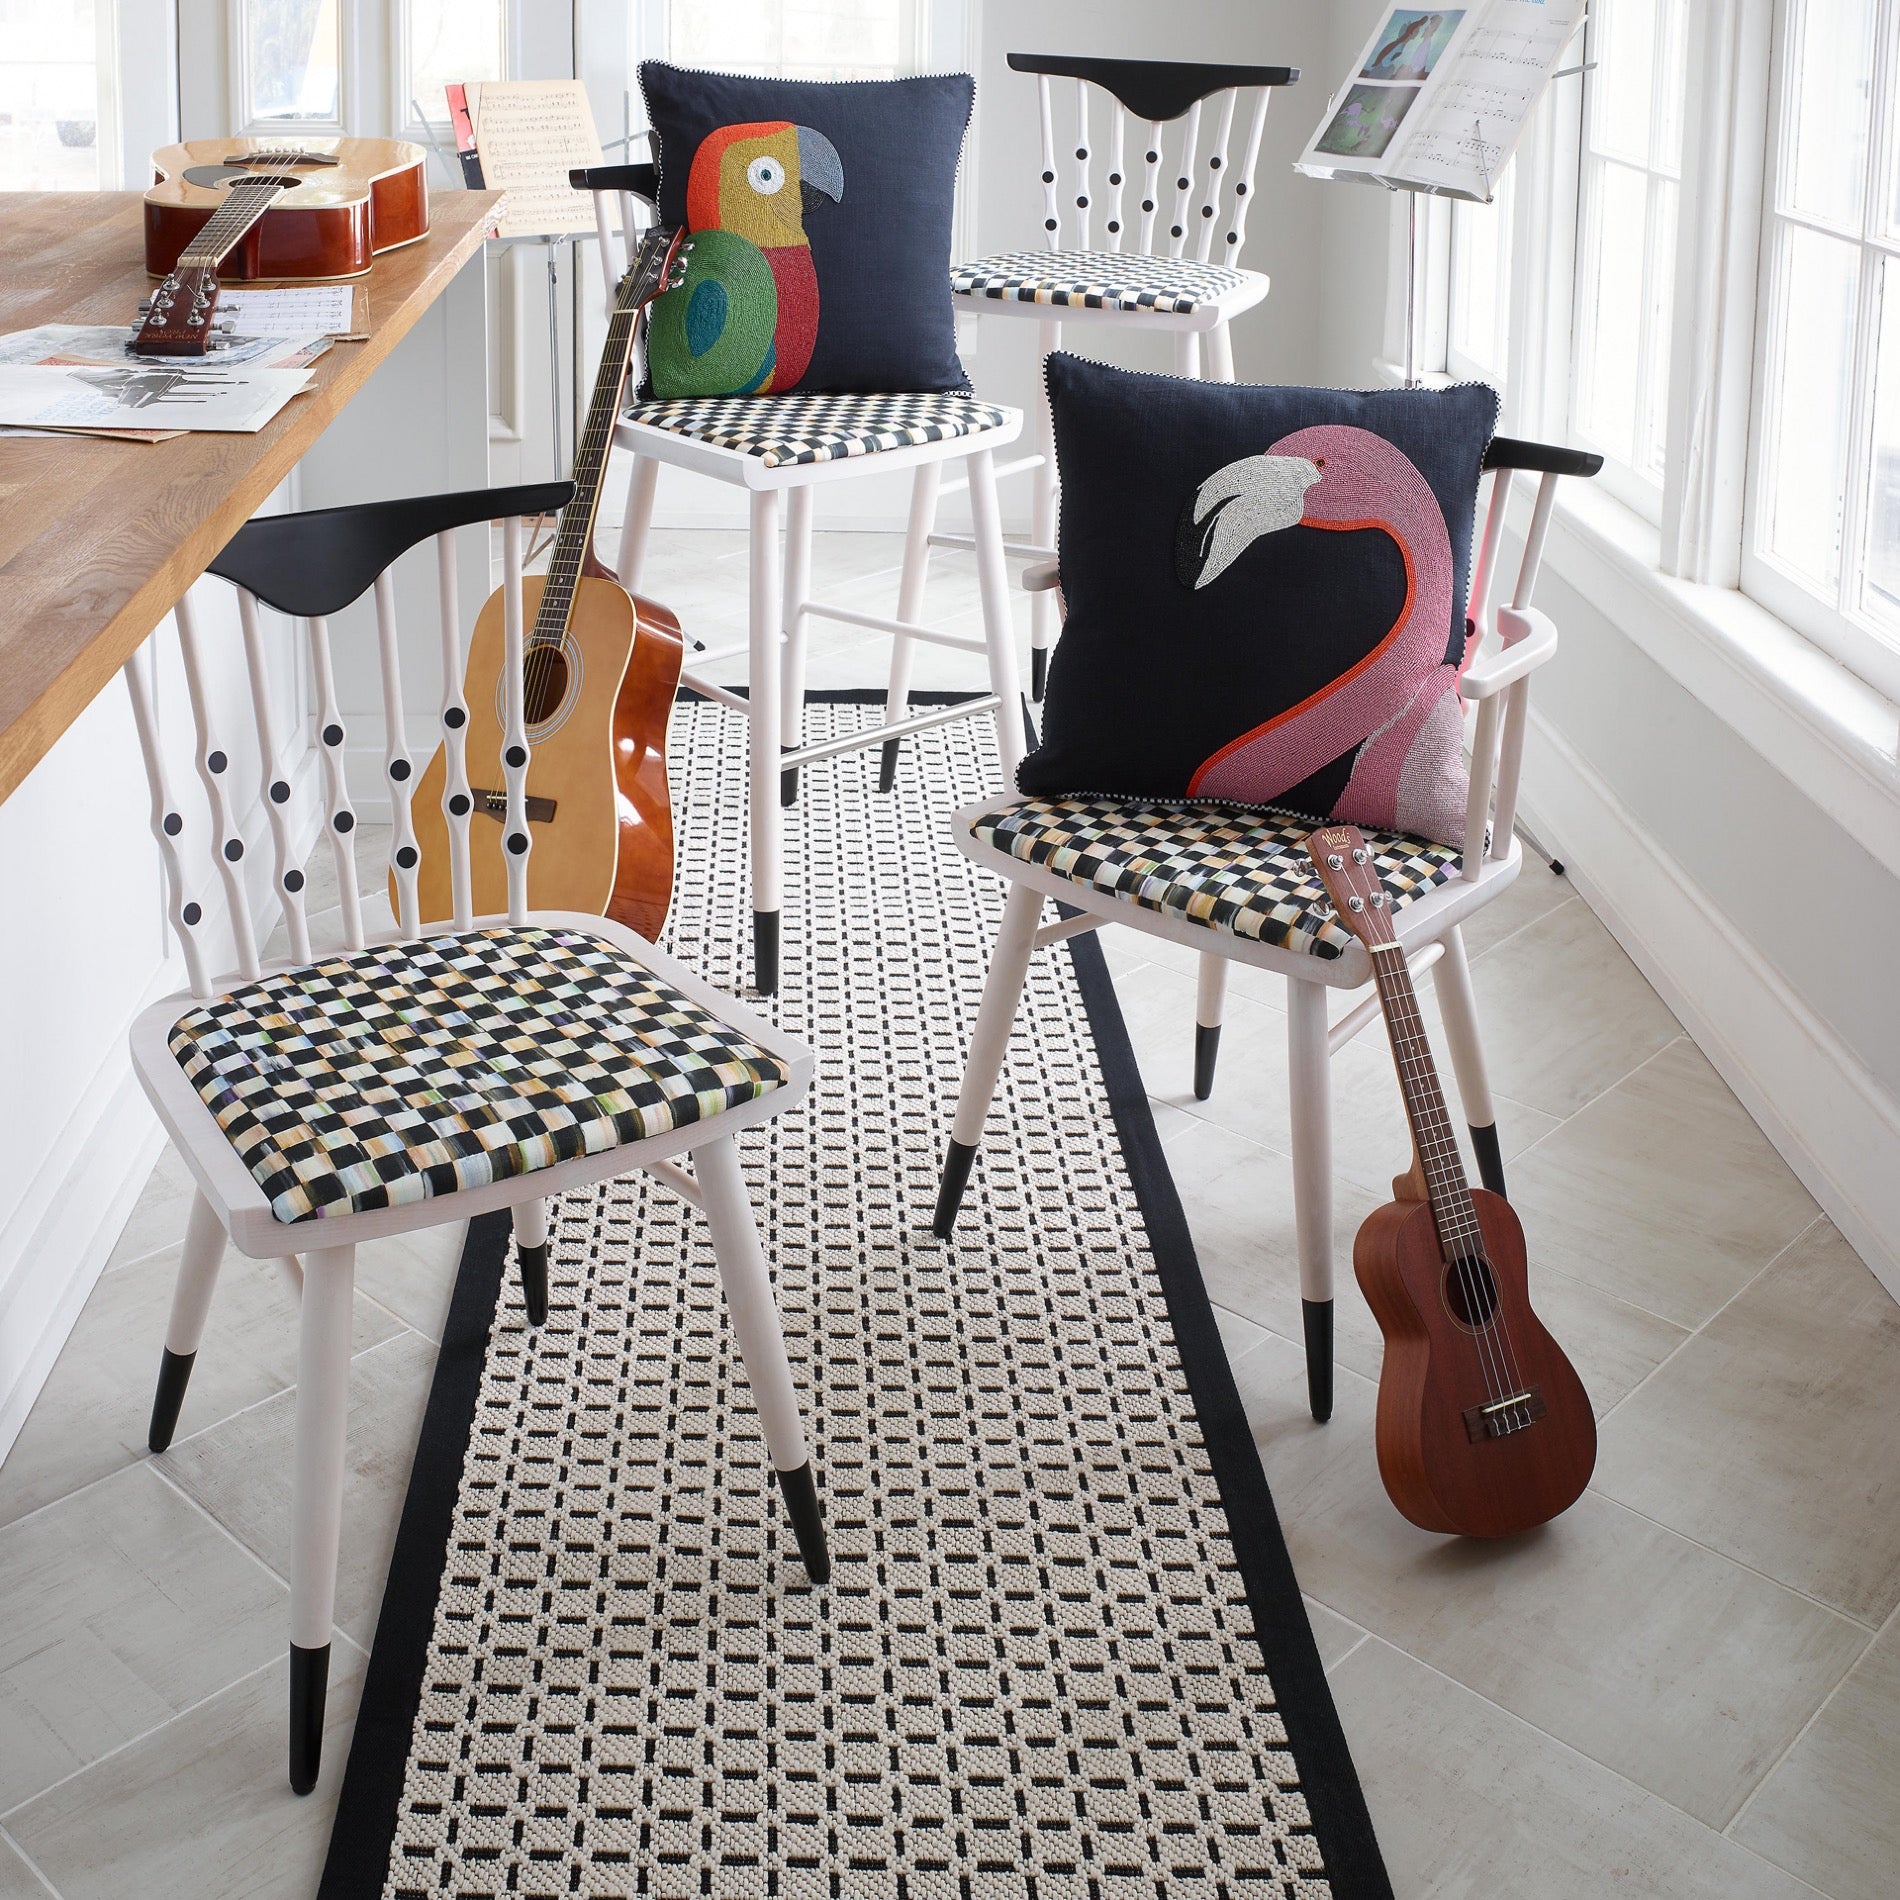 Four Counter stools, two colorful pillows with a flamingo and a  parrot, and three guitars in the room.